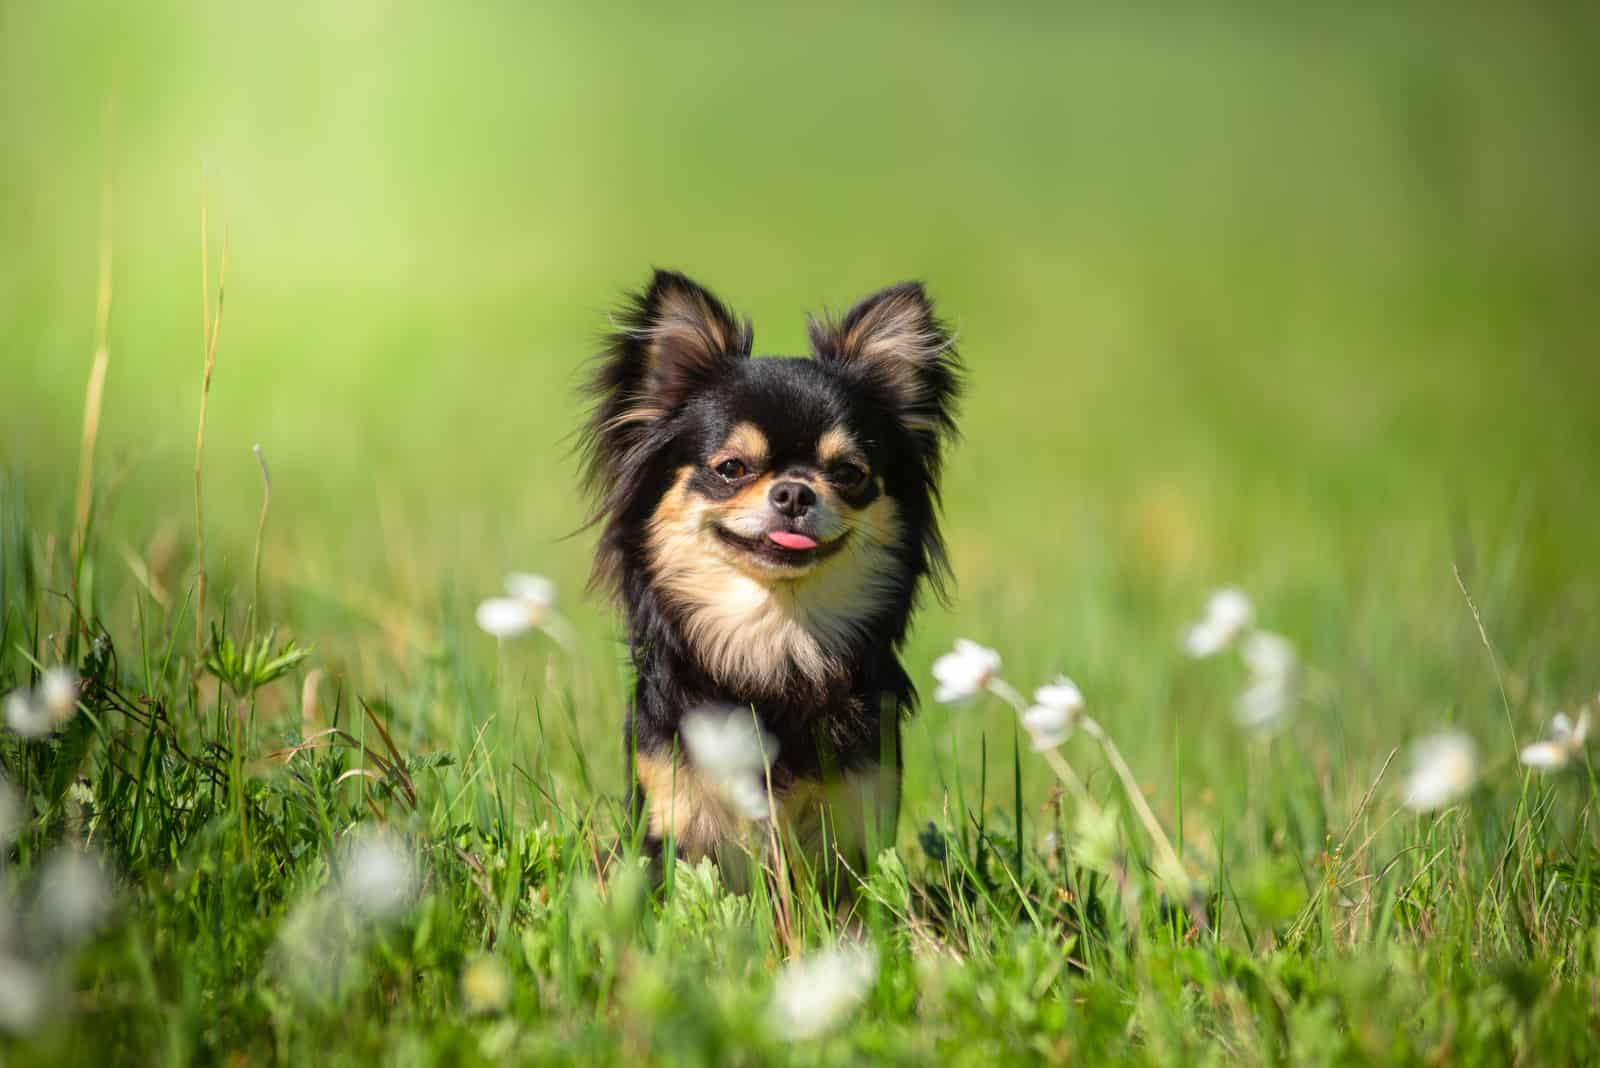 Chihuahua sititng in grass